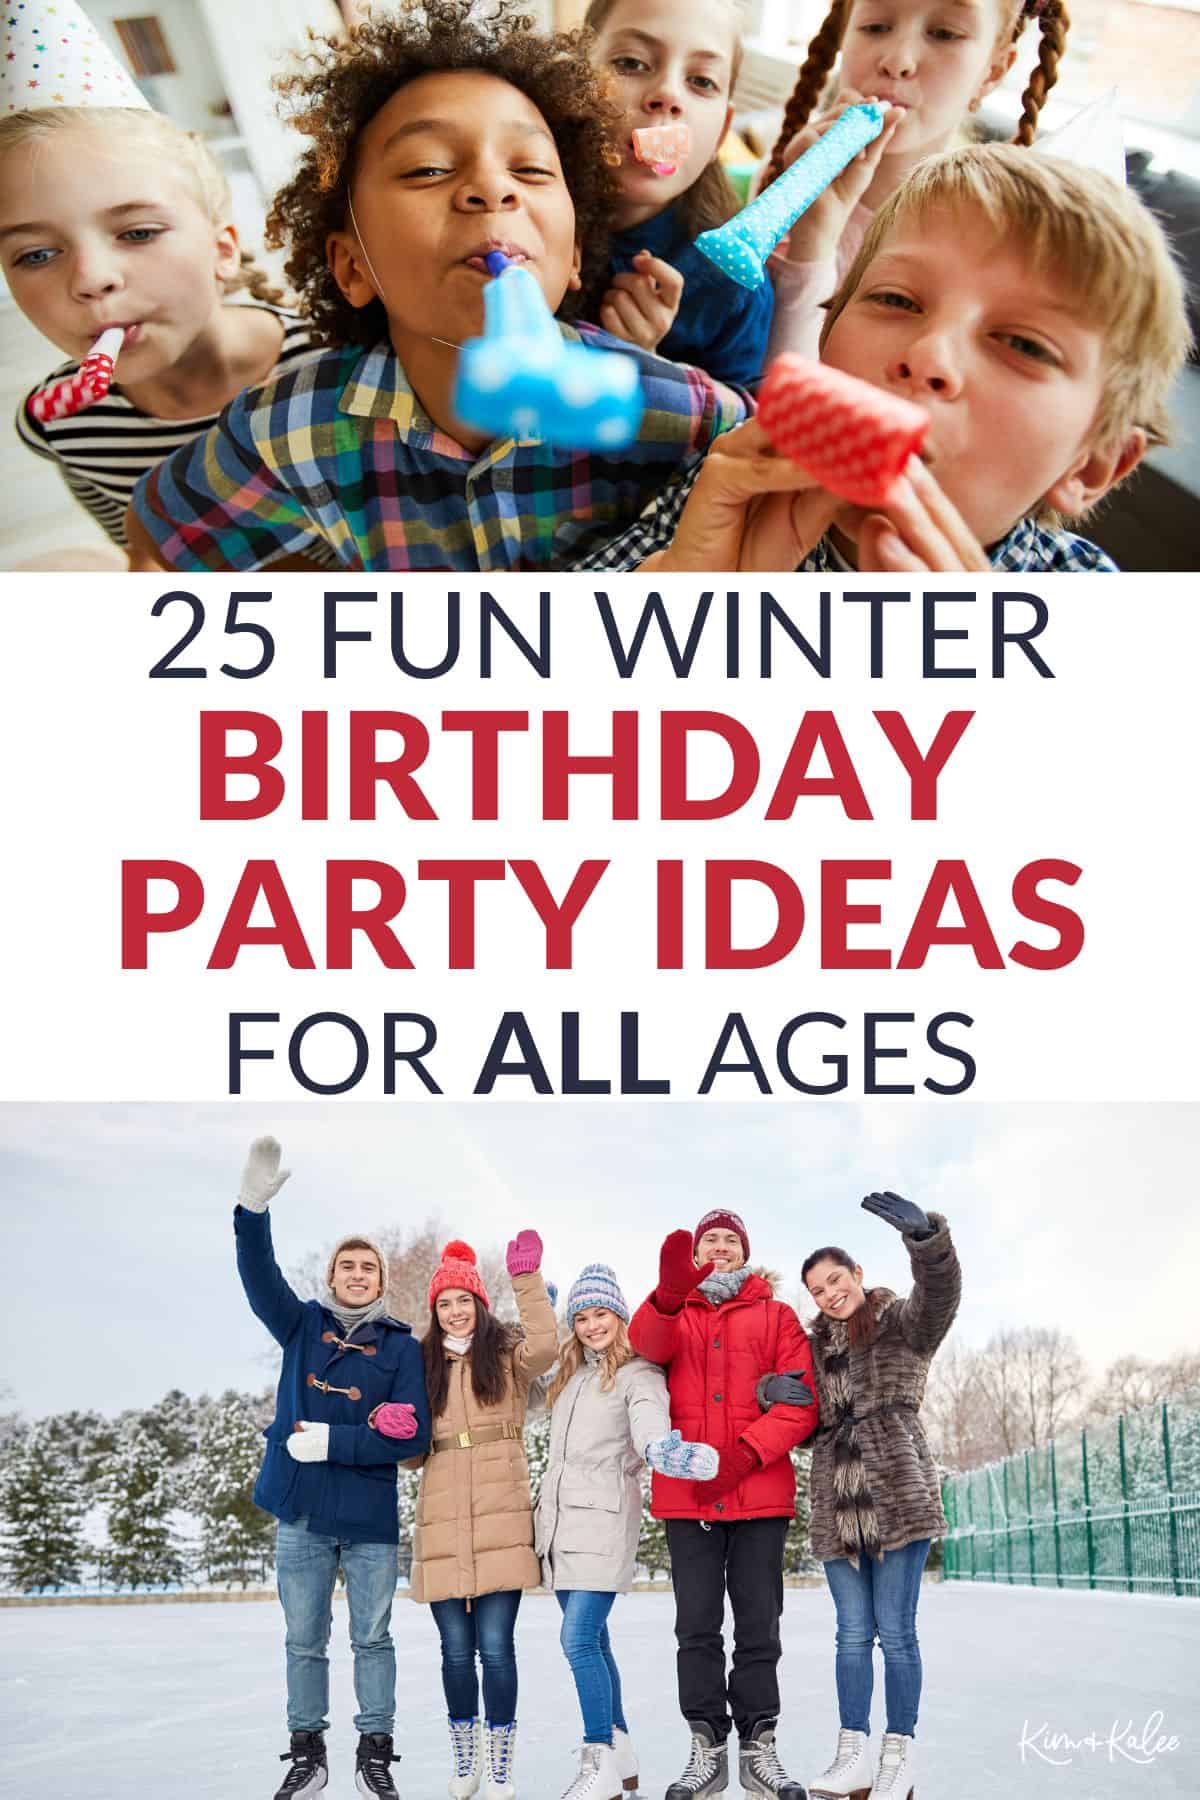 collage of 2 photos, one with young kids blowing confetti horns and one with a group of 5 teenagers ice skating - in the middle text overlay says 25 fun Winter birthday party ideas for all ages